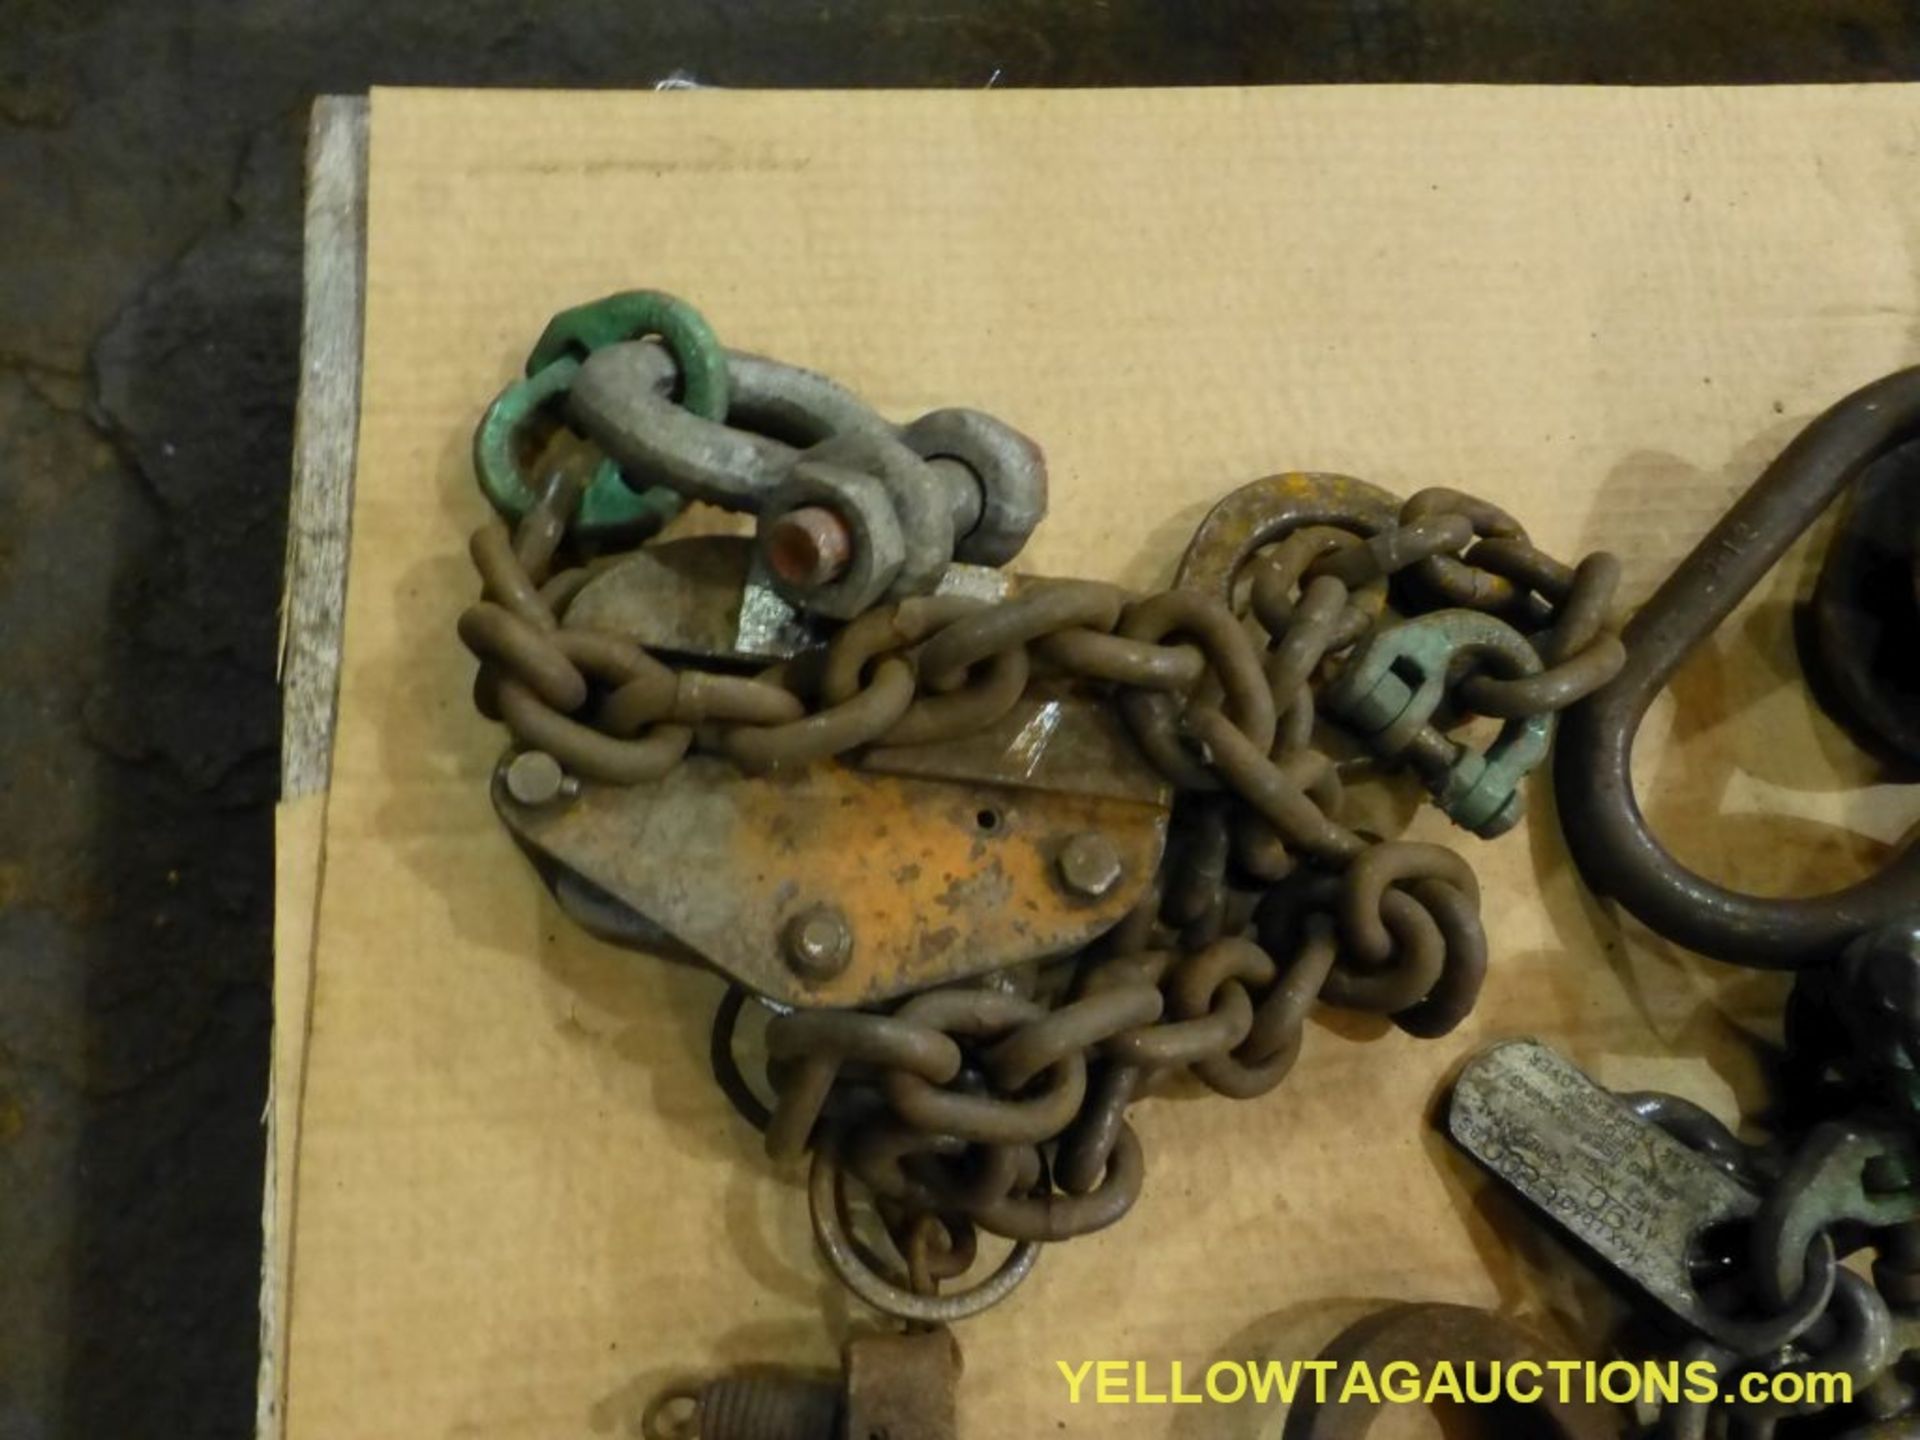 Lot of Assorted Lifting Clamps and Chain Slings - Image 5 of 6